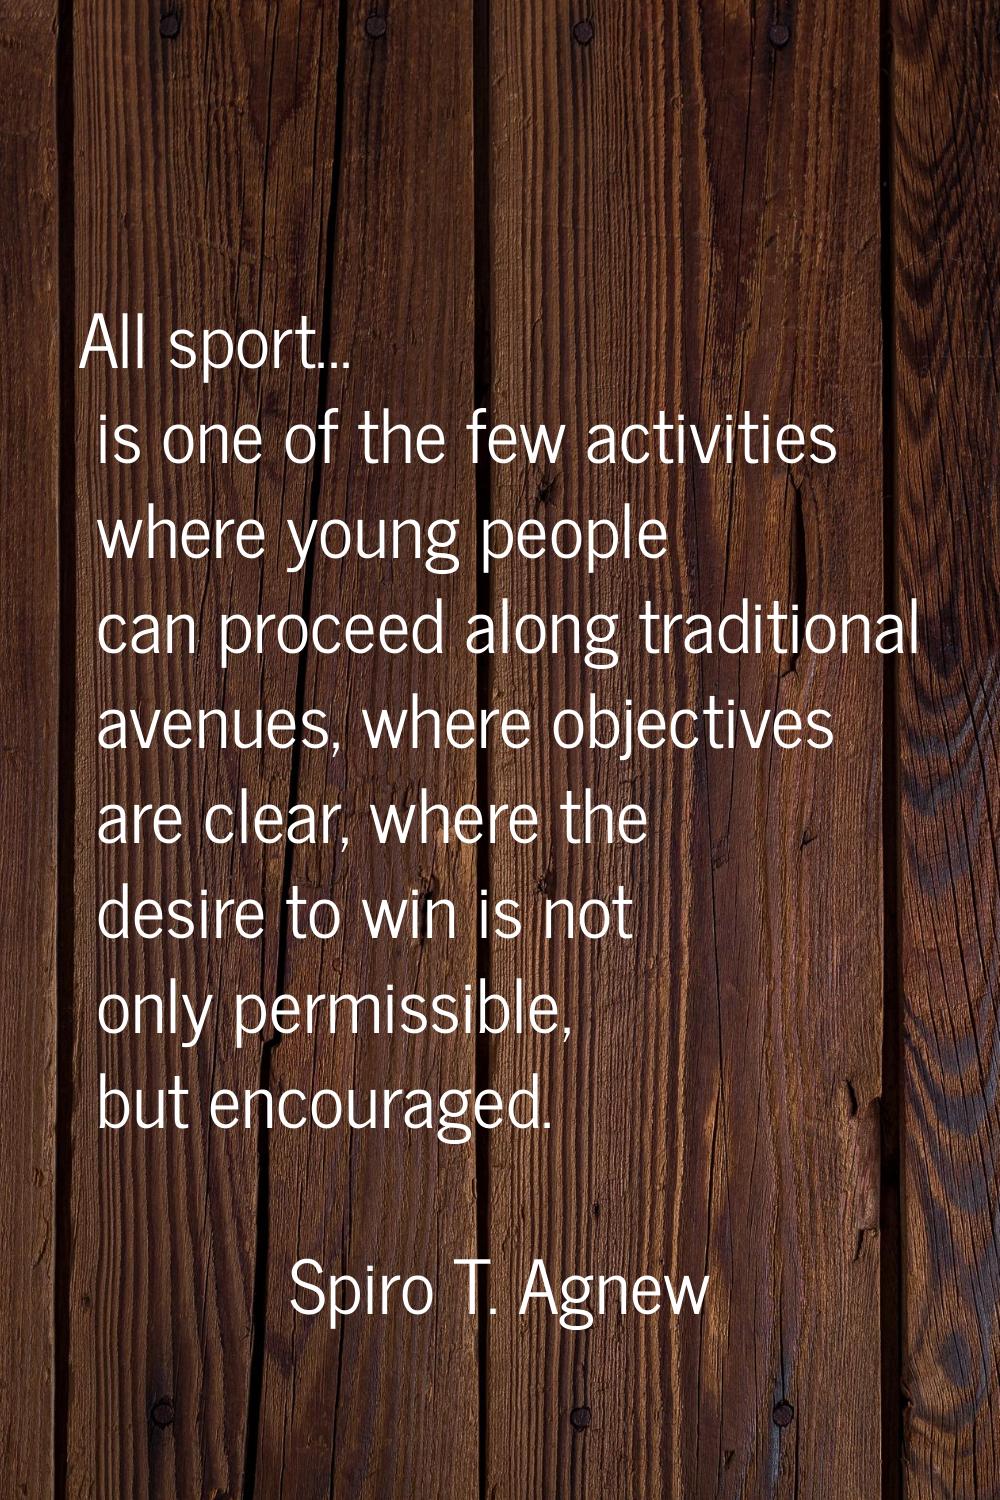 All sport... is one of the few activities where young people can proceed along traditional avenues,